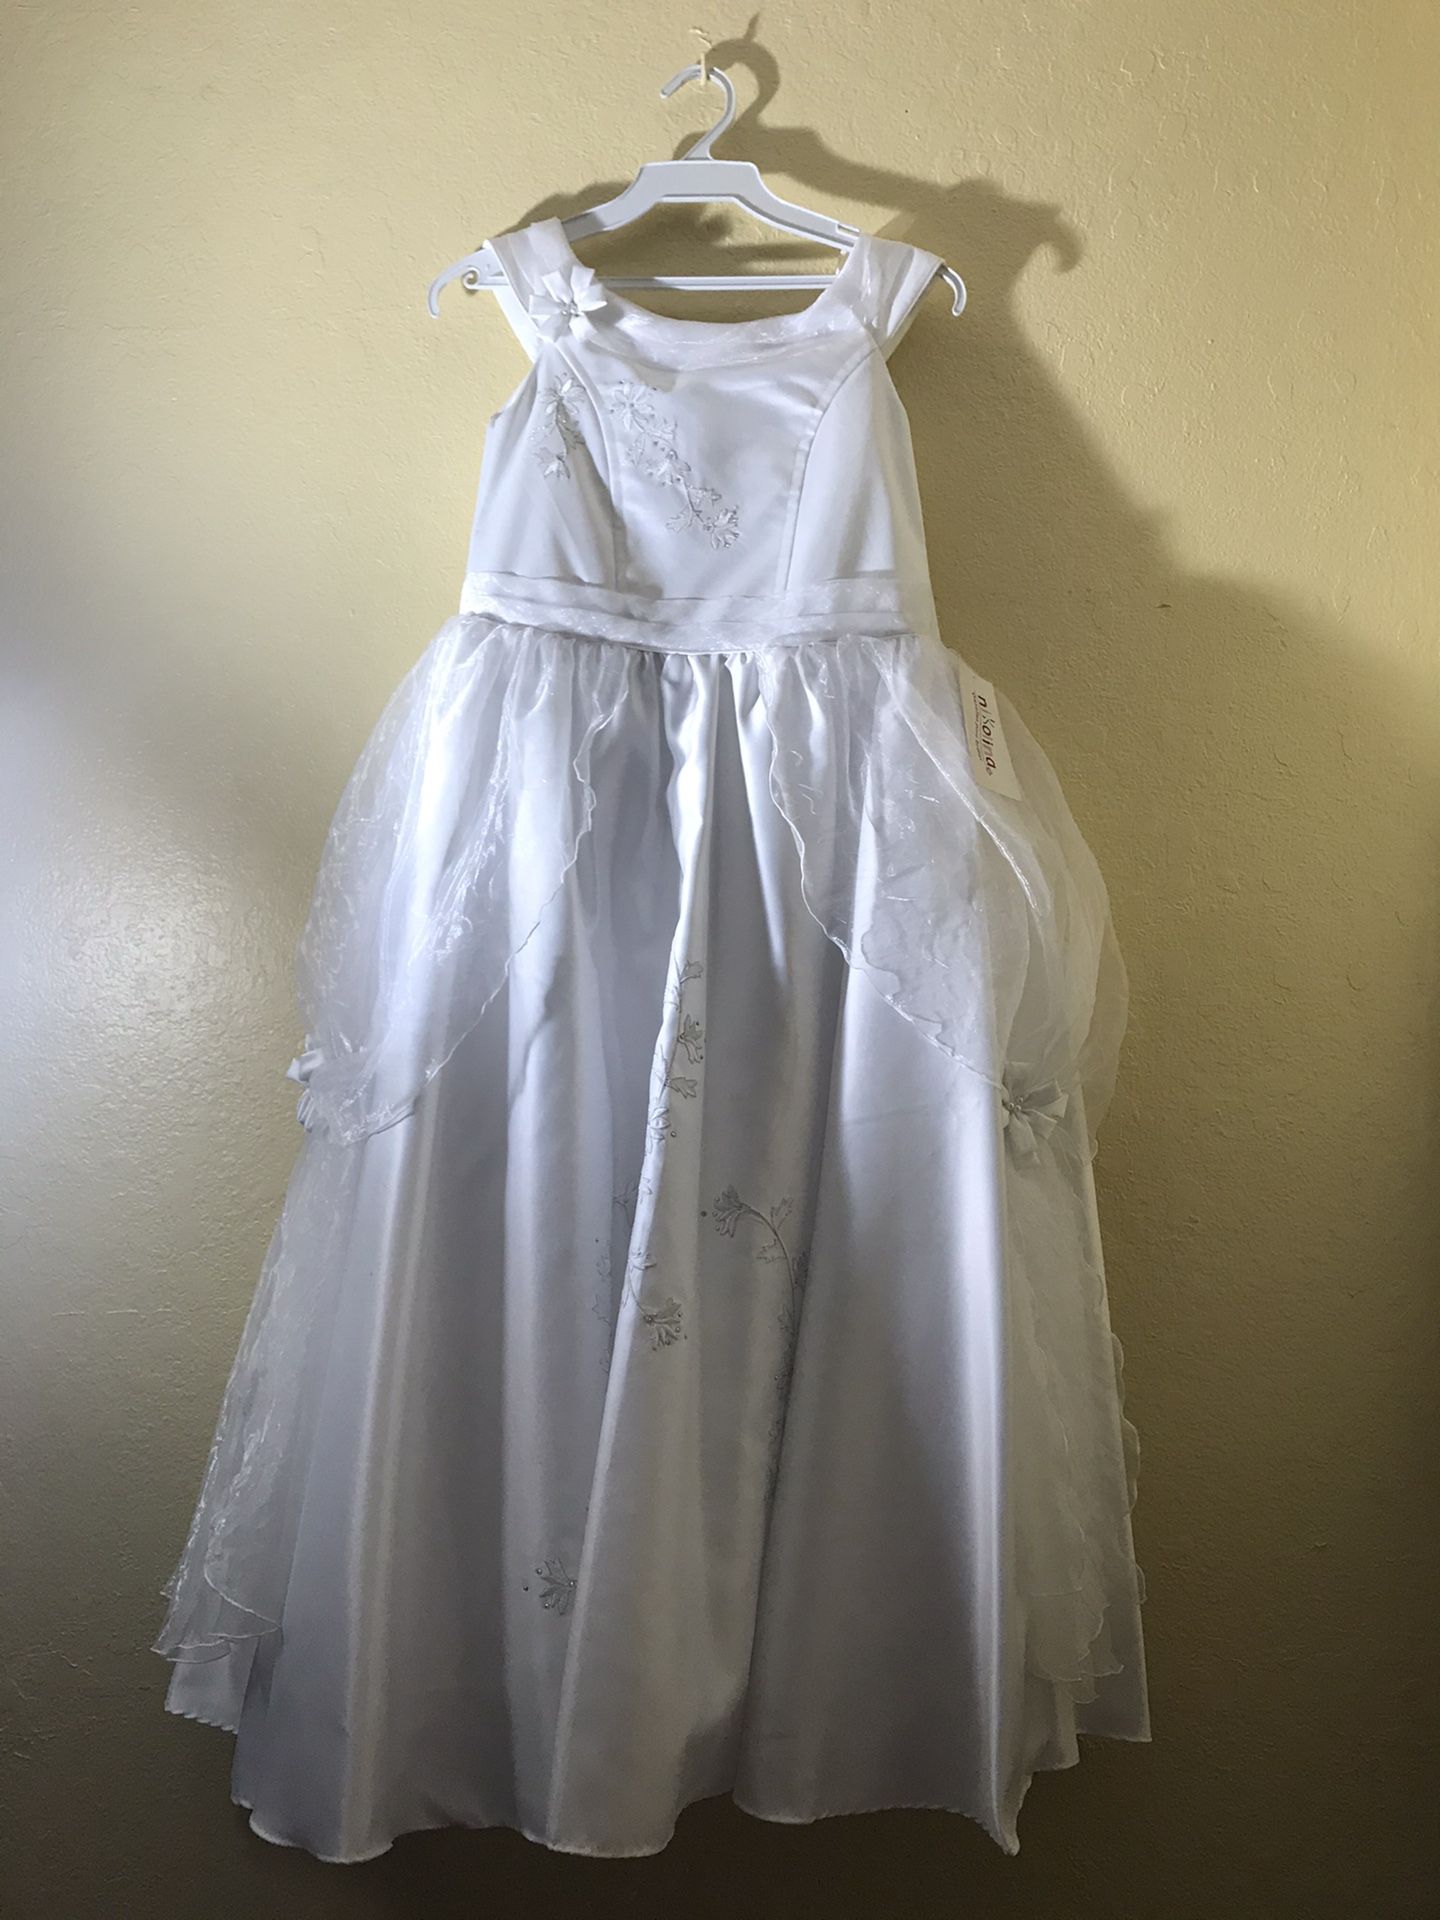 First Communion and Baptism dresses